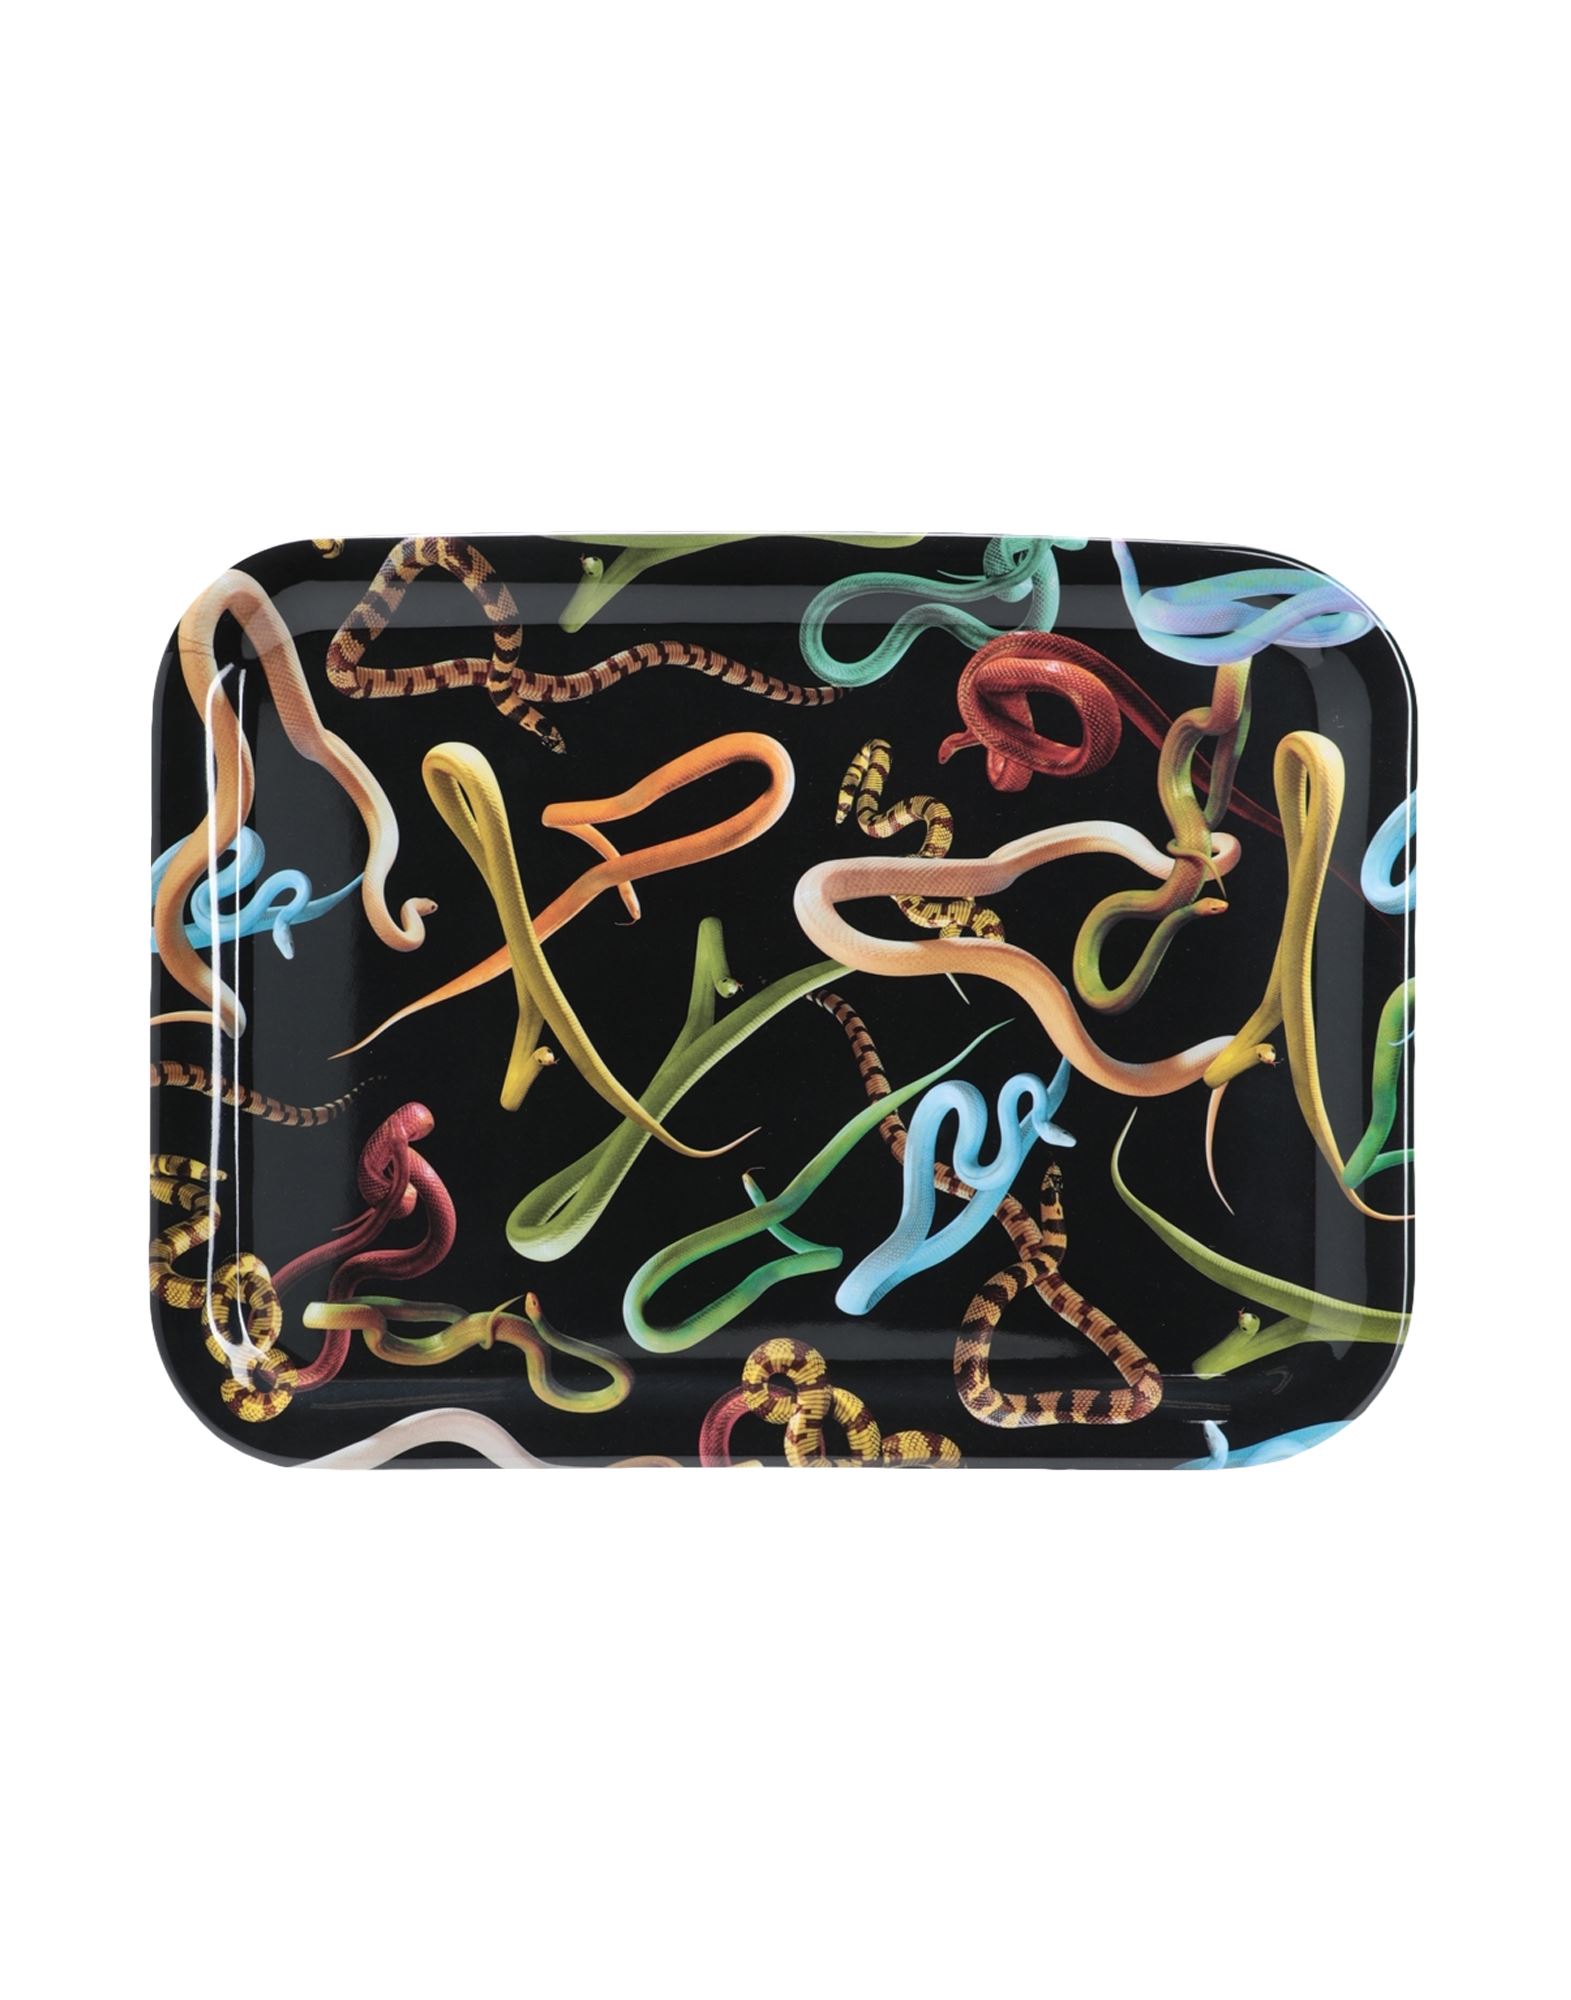 Seletti Wears Toiletpaper Trays And Serving Plates In Black